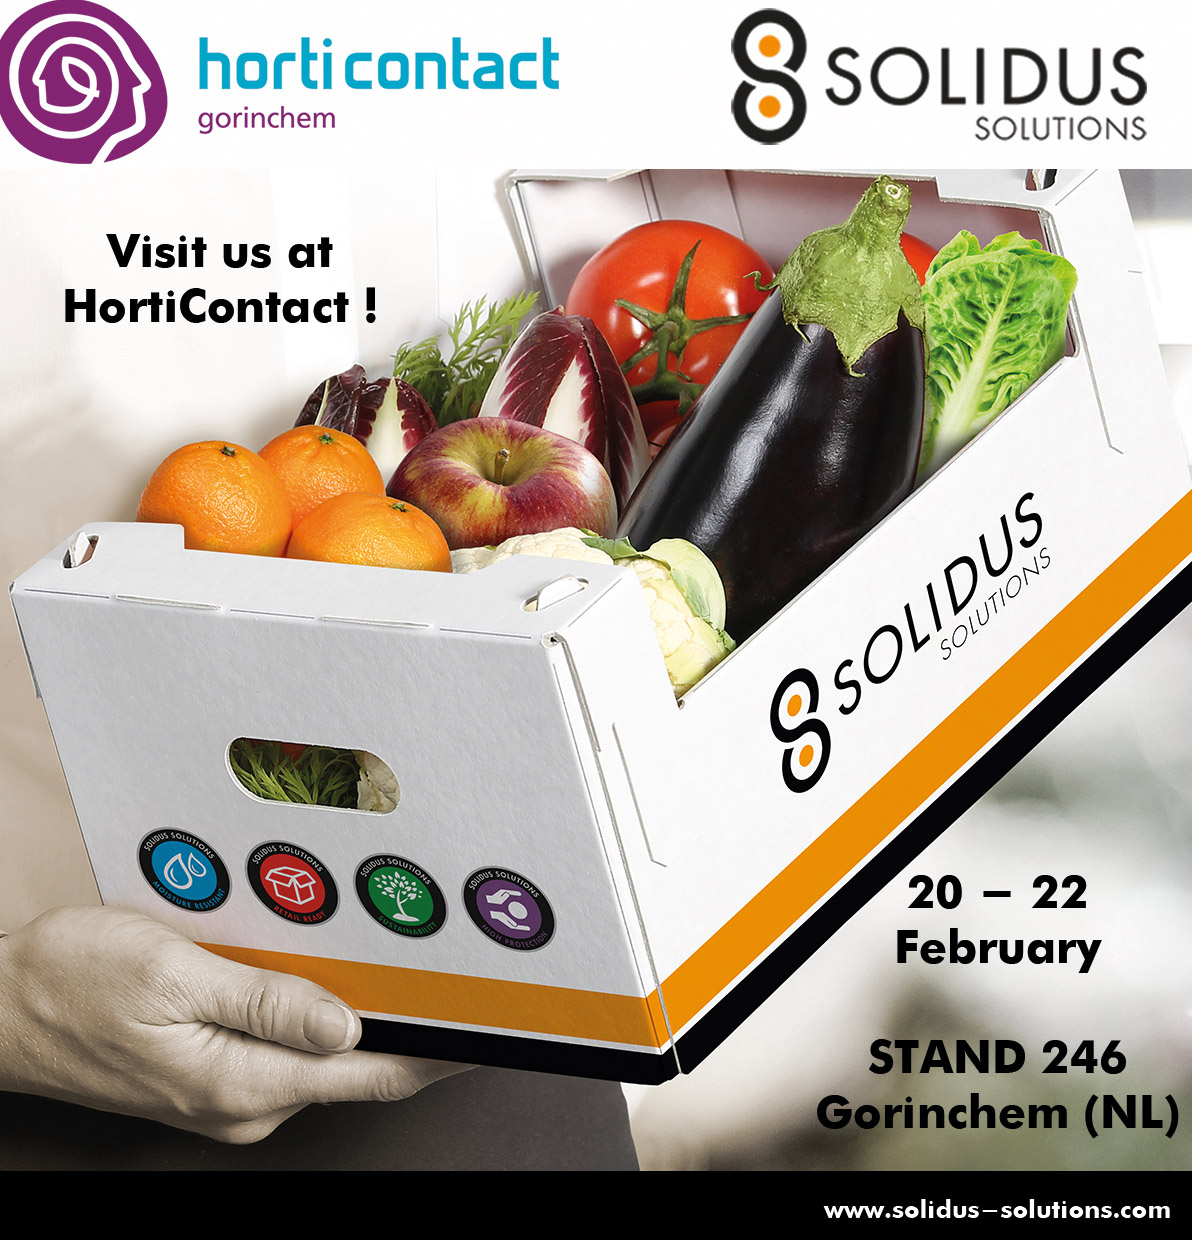 Solidus-Solutions-on-Horticontact-Gorinchem